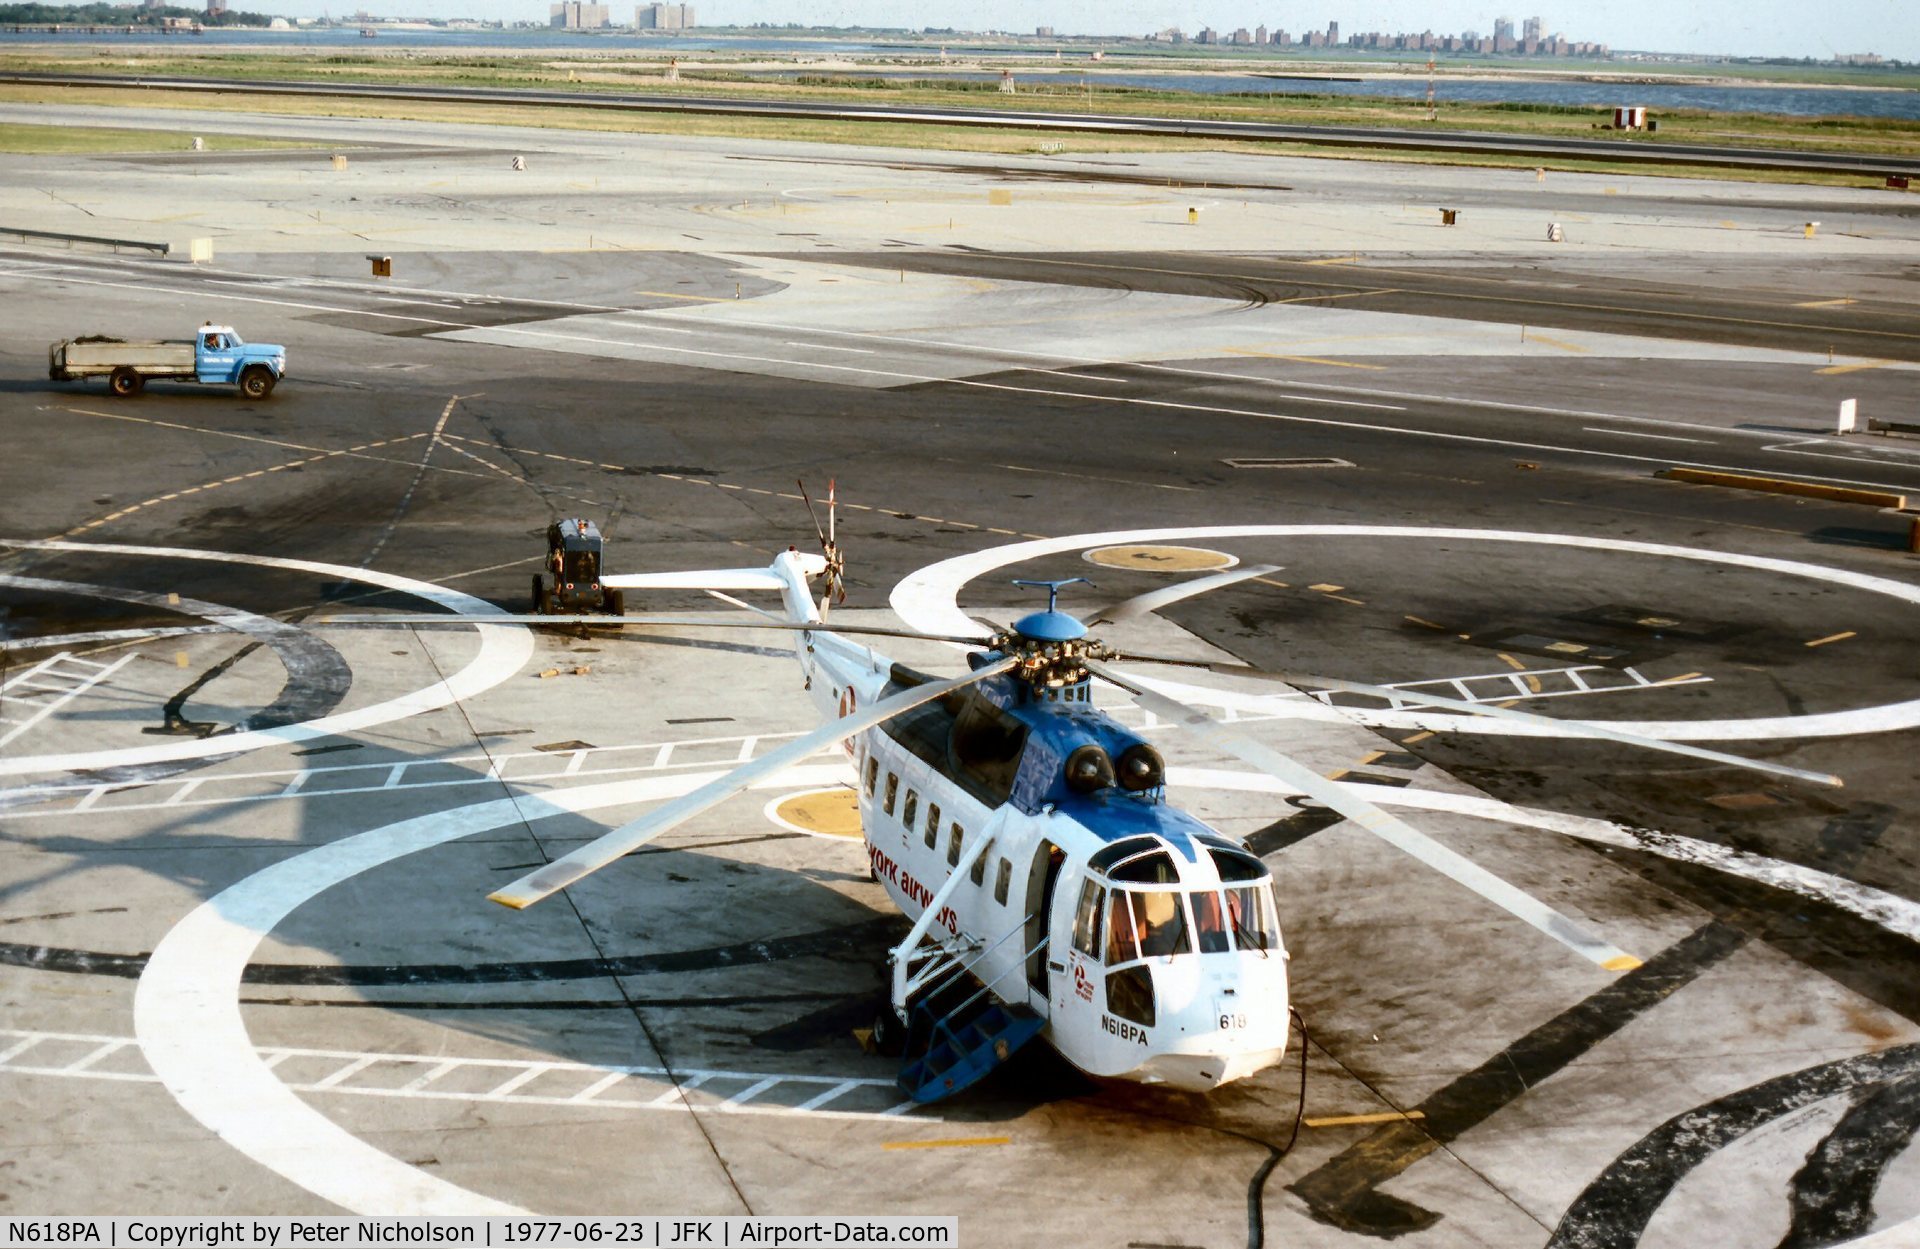 N618PA, 1968 Sikorsky S-61L C/N 61426, S-61L of New York Airways at the terminal at Kennedy in the Summer of 1977.